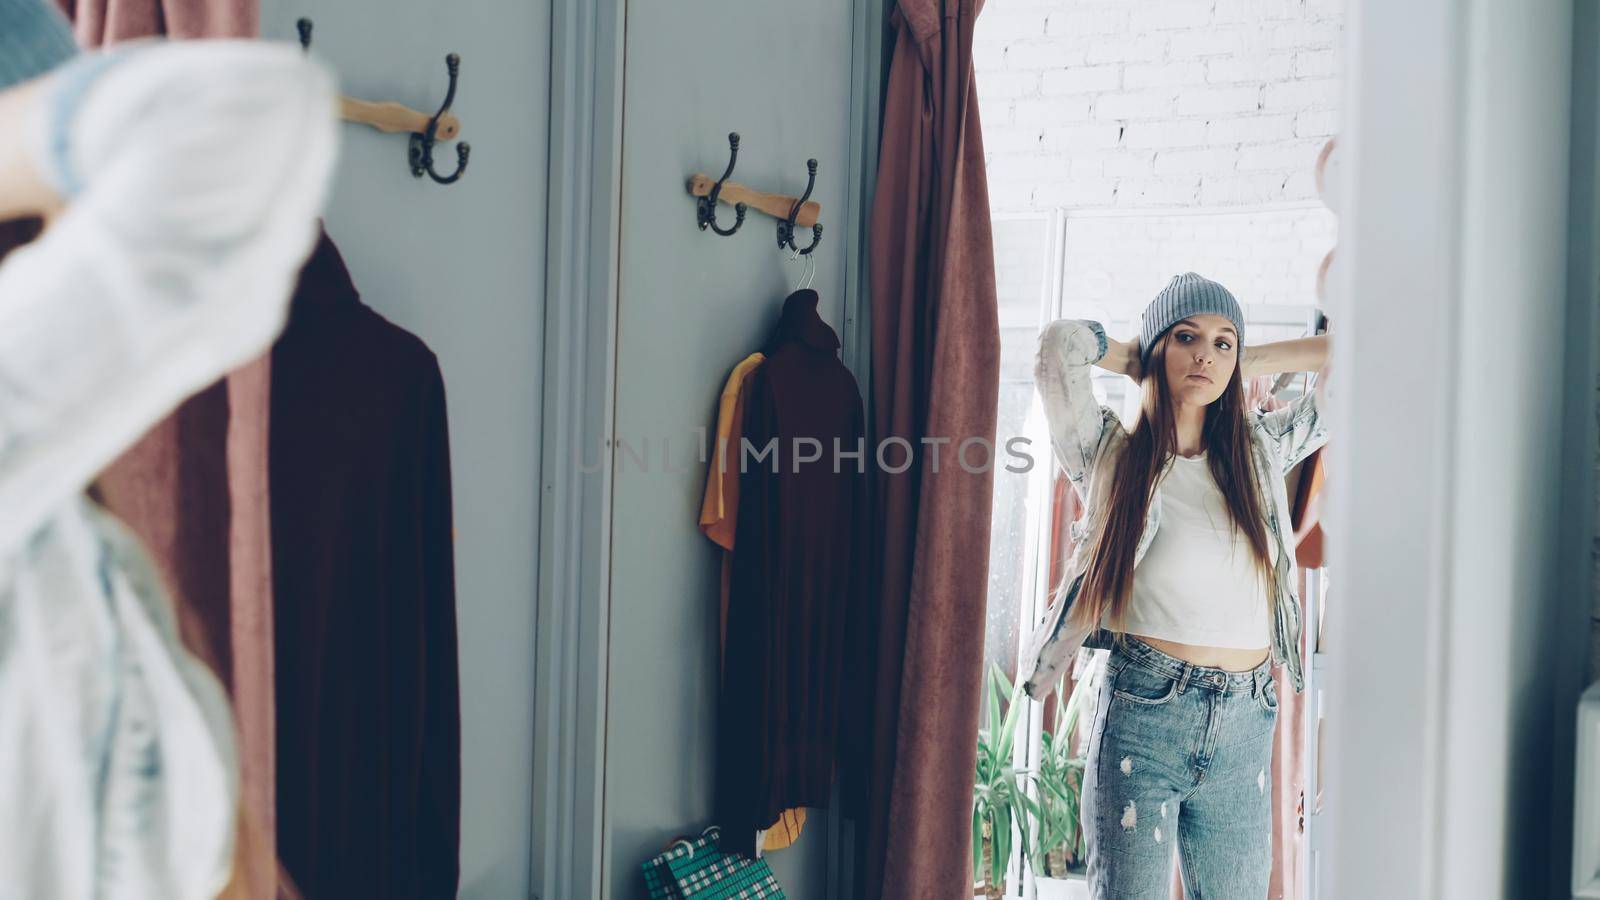 Mirror shot of young girl trying on clothes in fitting room. She is wearing denim jacket, jeans and hat, smoothing her hair, moving and looking in mirror to check image. Teenager shopping concept.